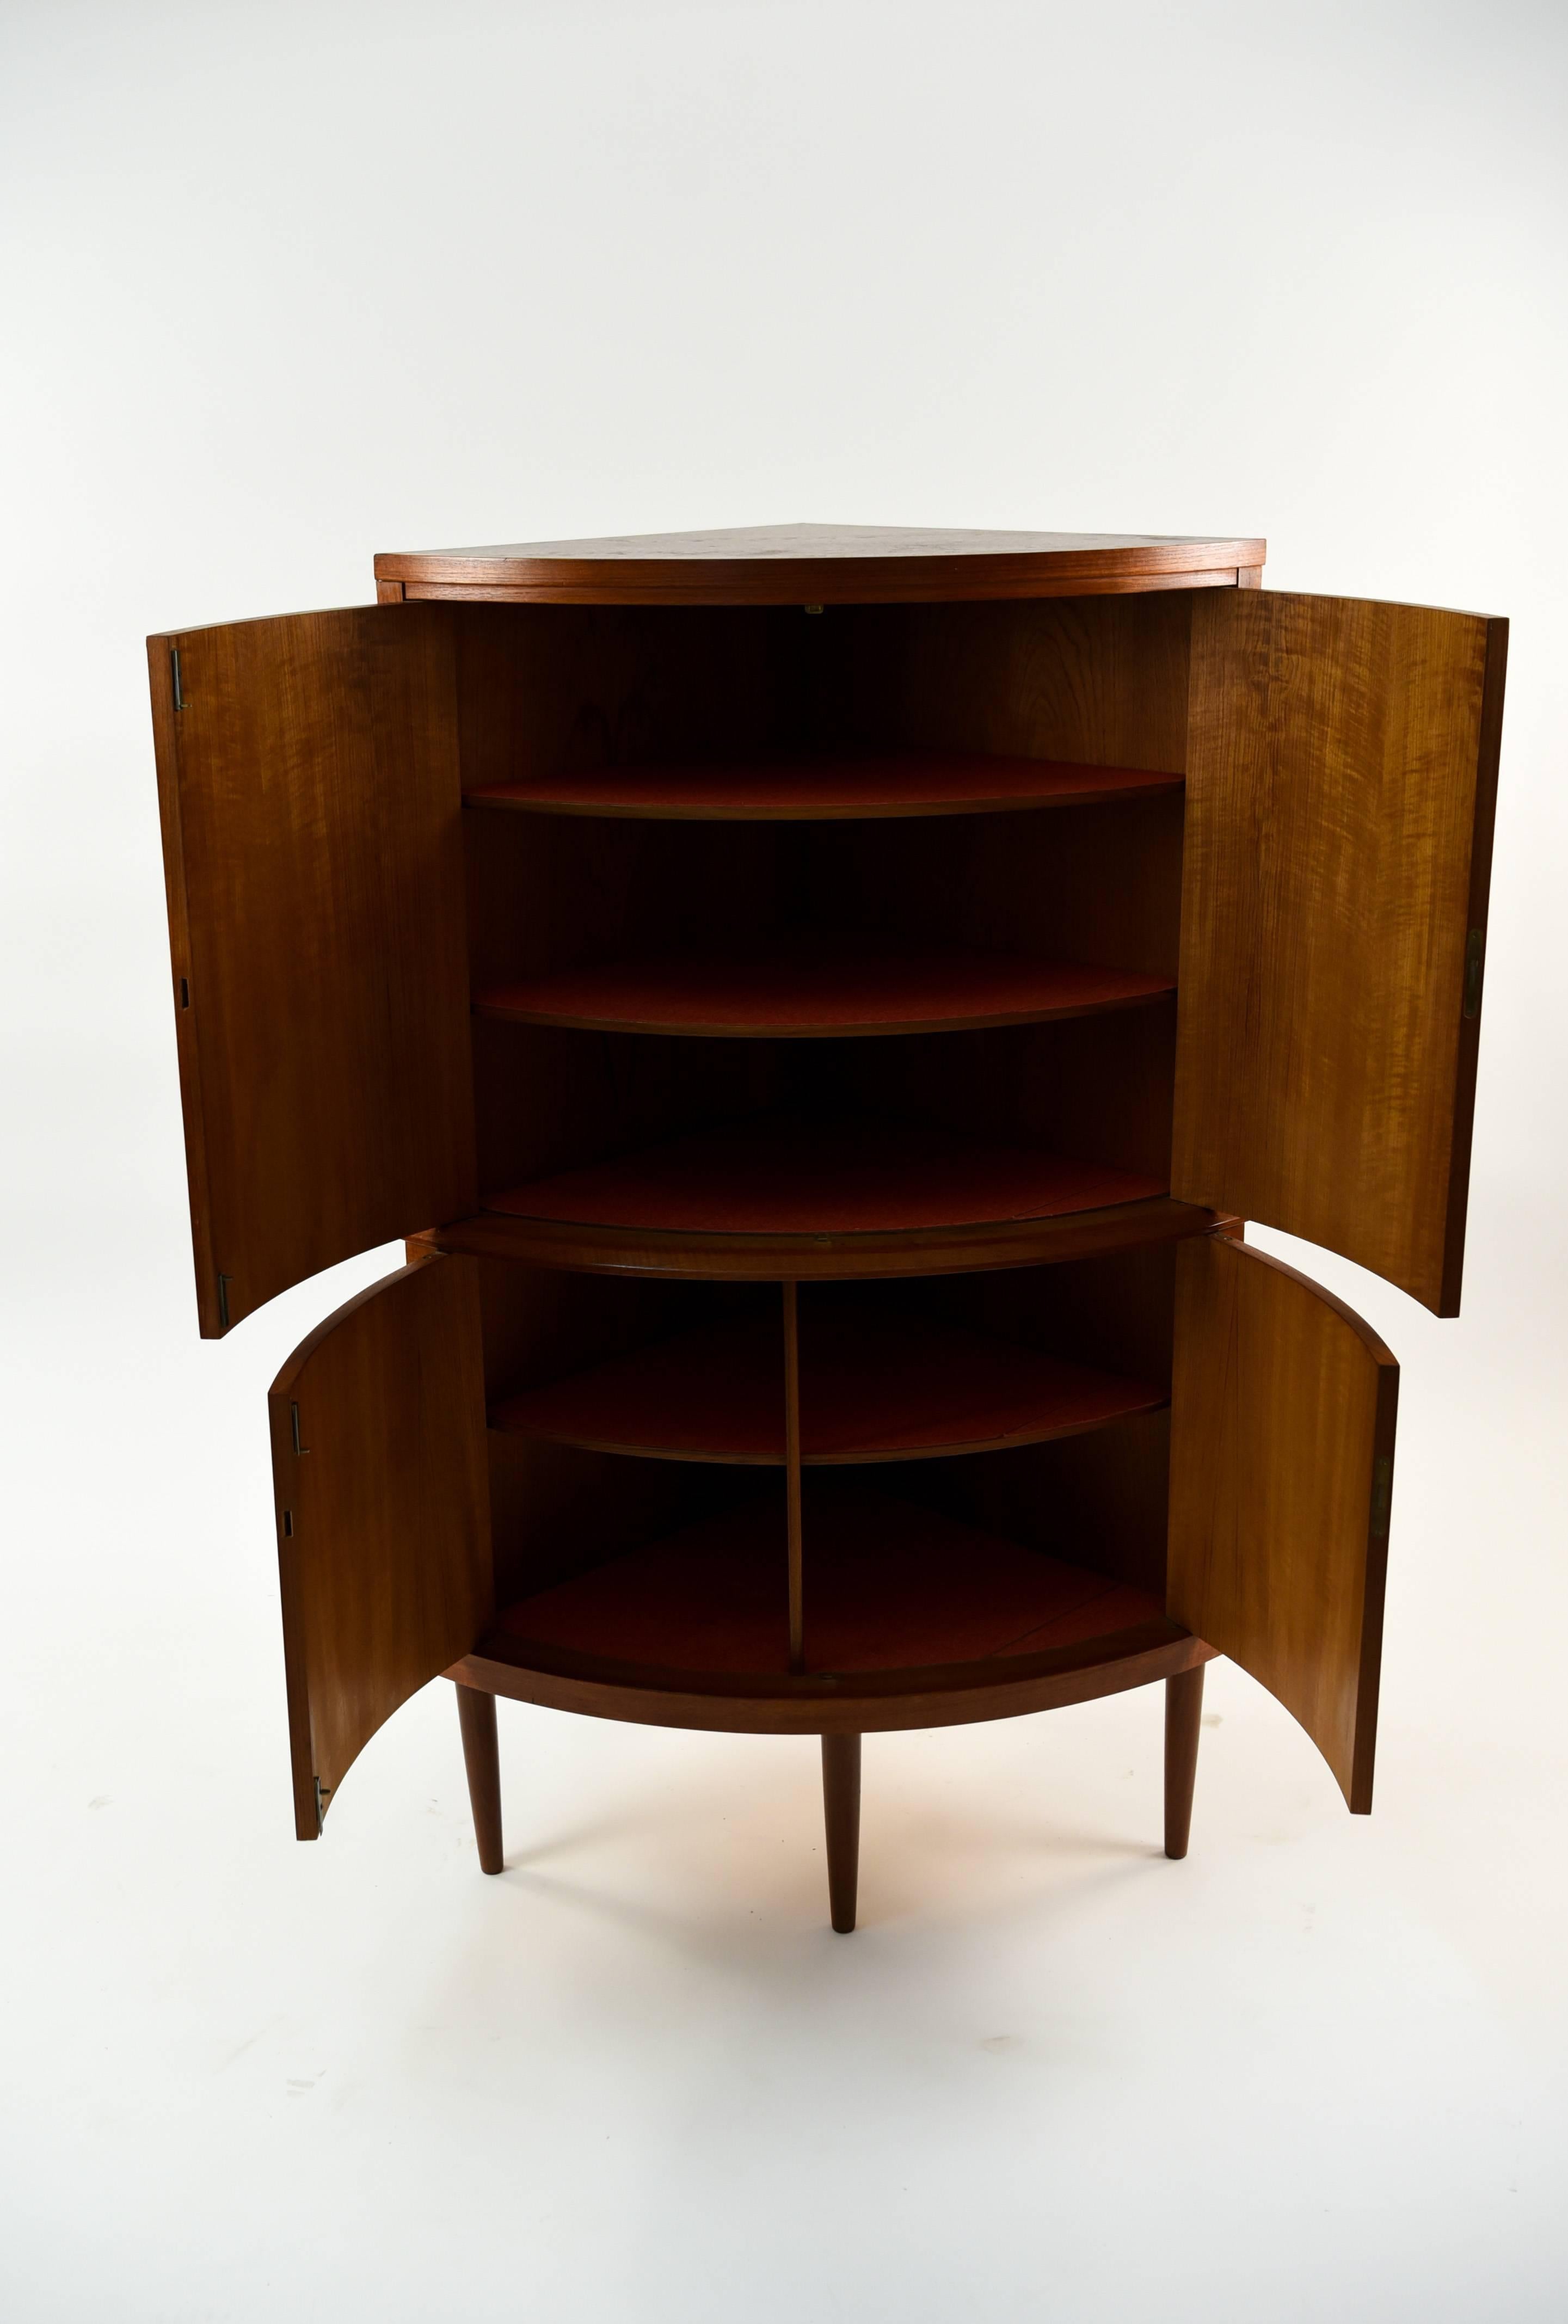 This Danish midcentury cabinet is made of teak wood. The beauty of the corner cabinet is its ability to remain tucked away without intruding into the space of a room. This cabinet provides a good storage area and great midcentury design that make it